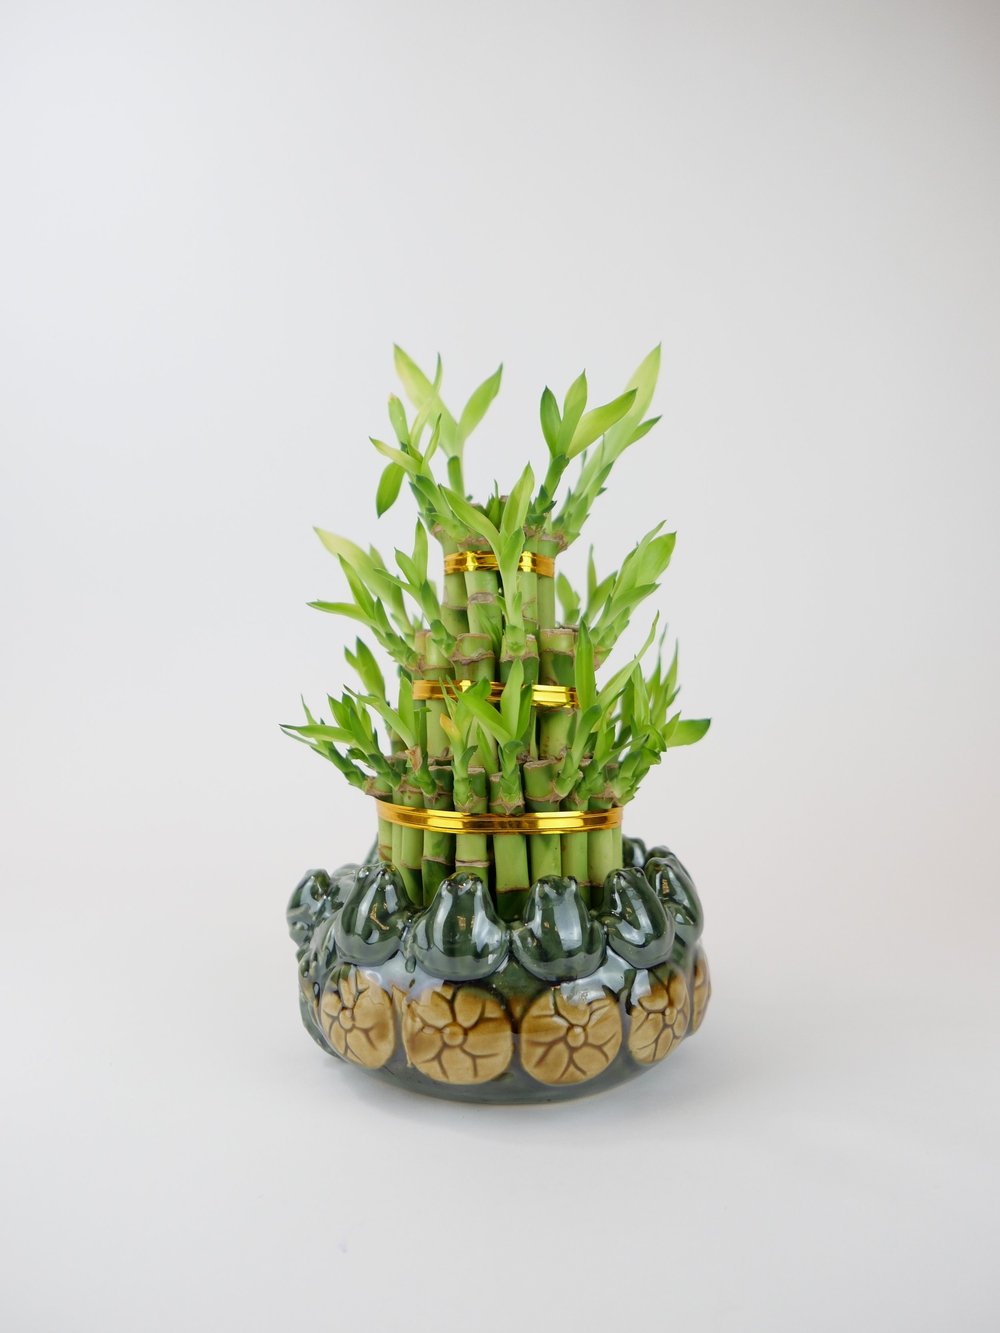 Square Glass Vase 3 With 5 Lucky Bamboo Stalks